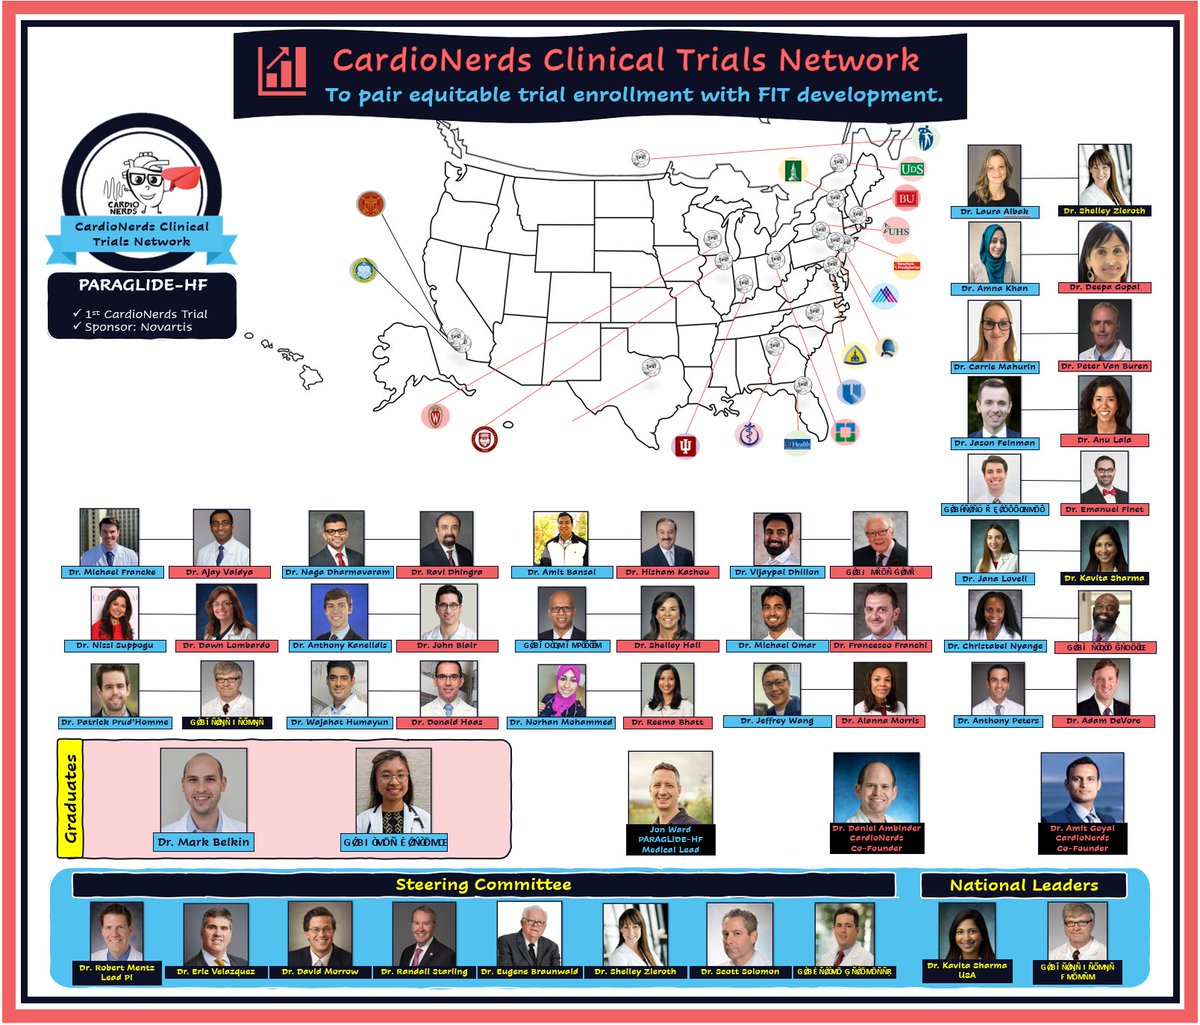 🚨The @CardioNerds Clinical Trial Network sees its 1st trial through publication - PARAGLIDE-HF.🚨 FIT Perspective - @jjfein @JLovellMD @CardioDrNyange 🔗jacc.org/doi/10.1016/j.… Response - @robmentz @dranulala 🔗jacc.org/doi/10.1016/j.… PARAGLIDE-HF 🔗jacc.org/doi/10.1016/j.…